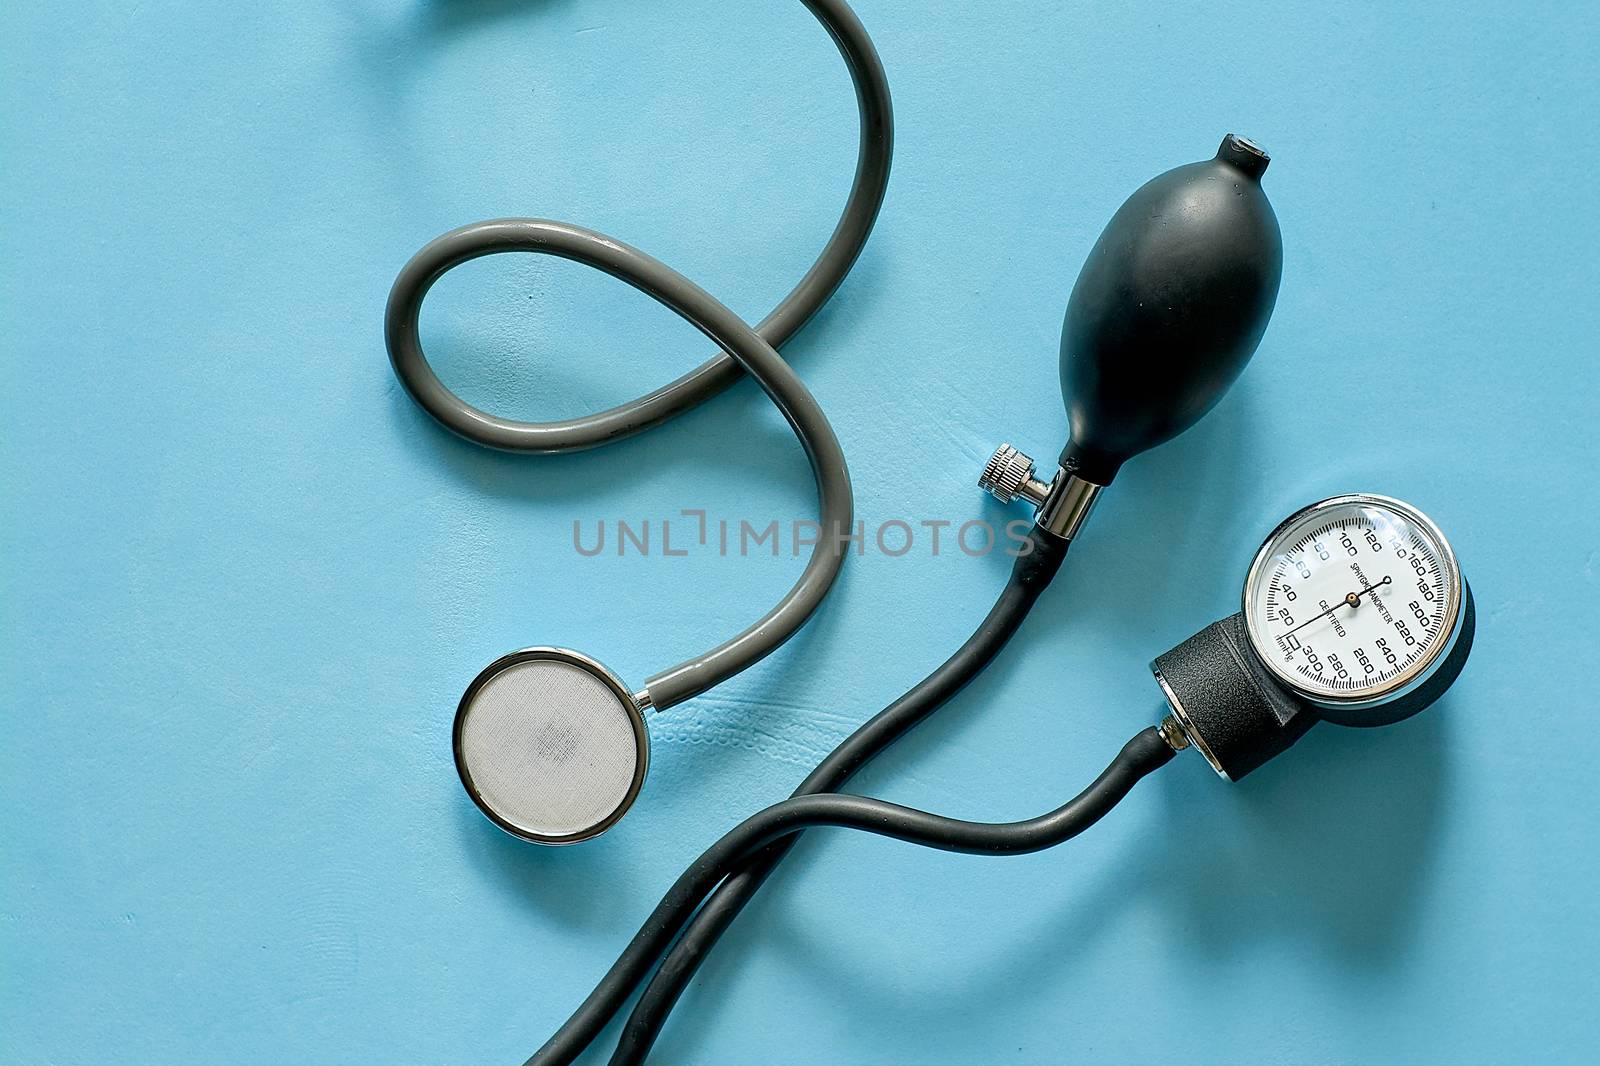 Phonendoscope stethoscope and sphygmomanometer on blue background with copy space for text. Medicine consept. Close-up view.